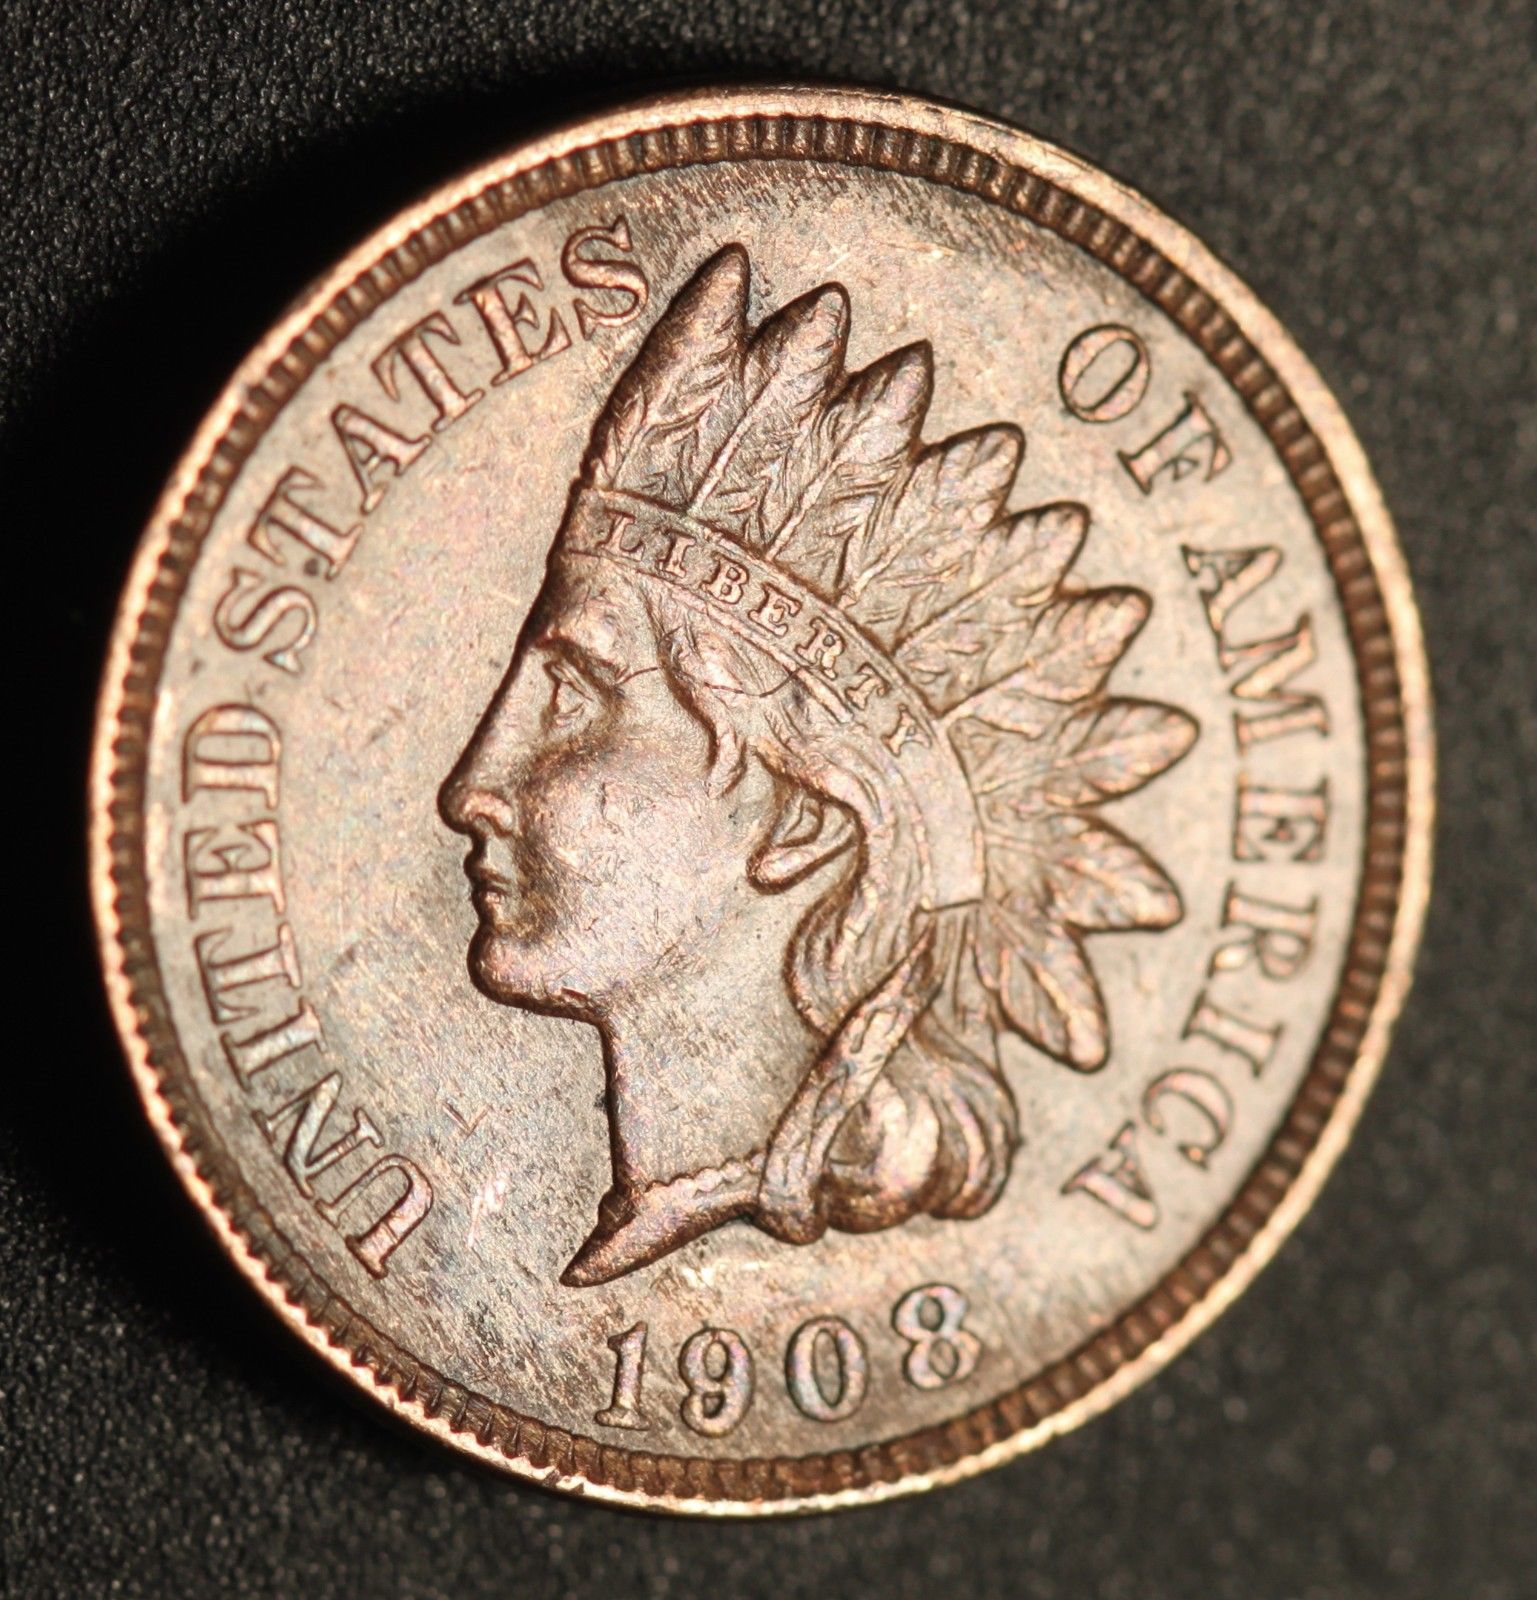 1908 MPD-012, RPD-004 - Indian Head Penny - Photo by Ed Nathanson